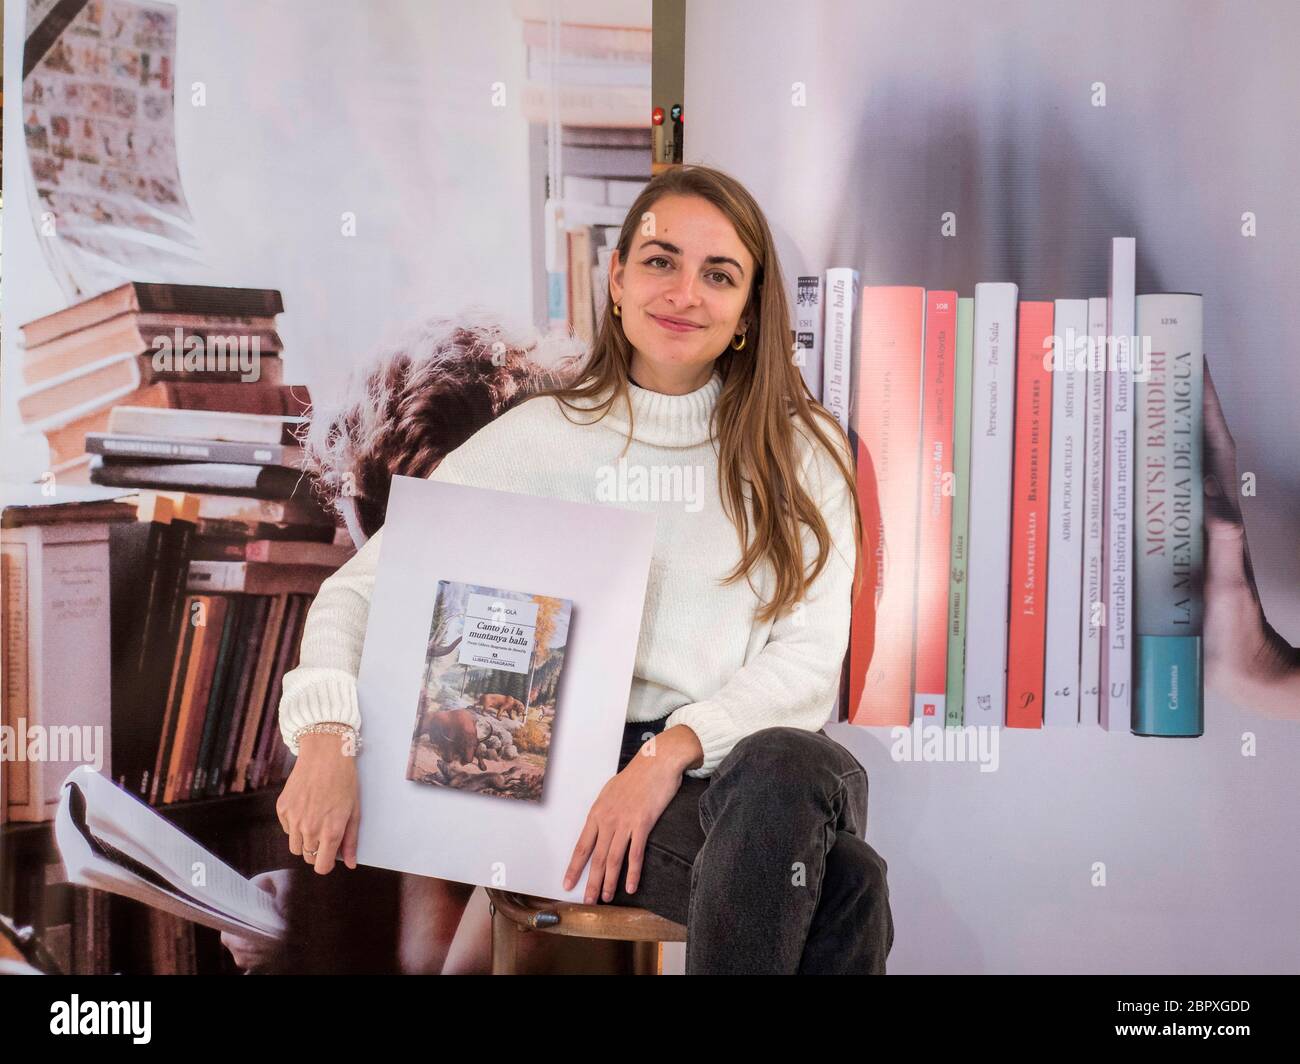 Irene Solà (Malla,1990) Catalan poet, writer and artist, wins the 'European  Union Literature Prize' with the book 'I sing and the mountain dance' 2020  Stock Photo - Alamy